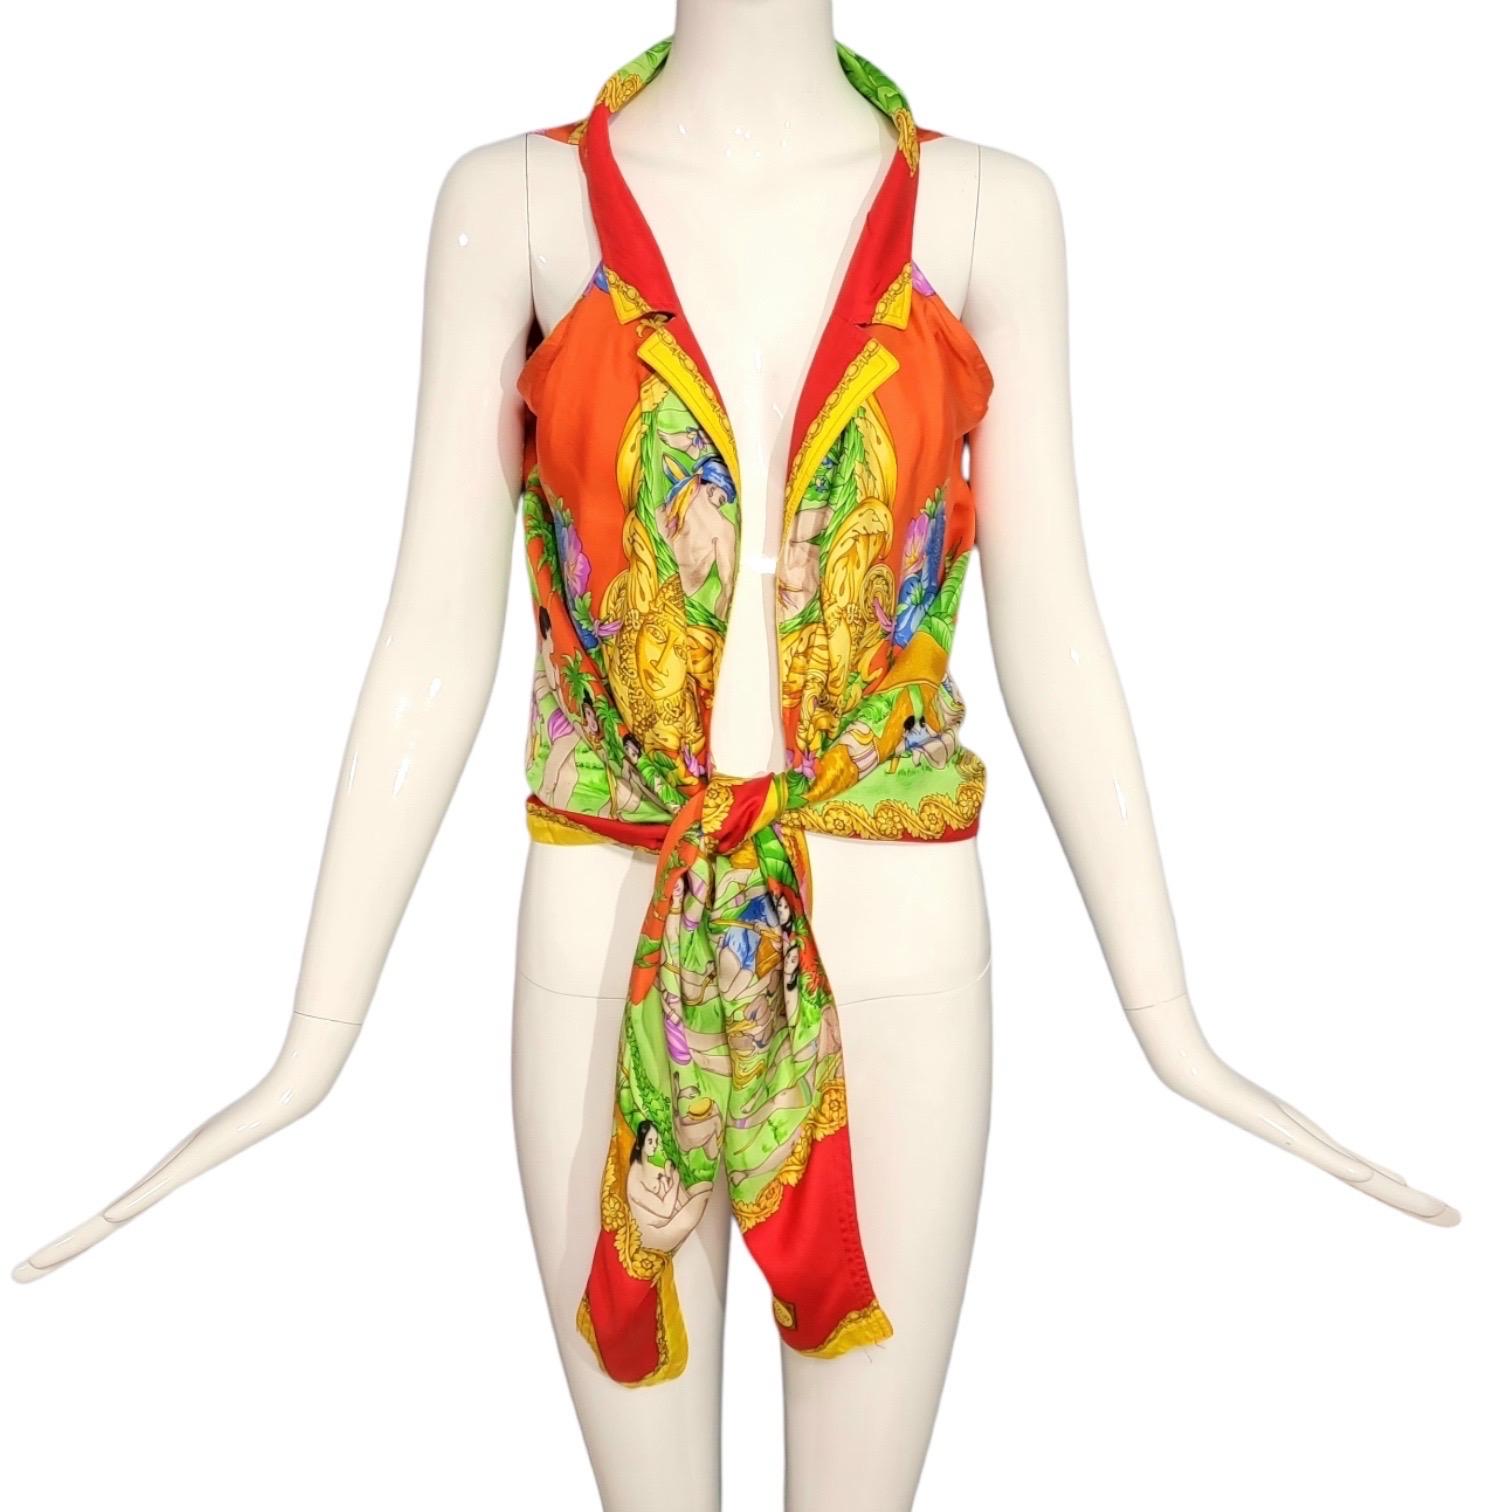 Gianni Versace Paradise Lost print Cropped Top Silk Shirt SS 1993